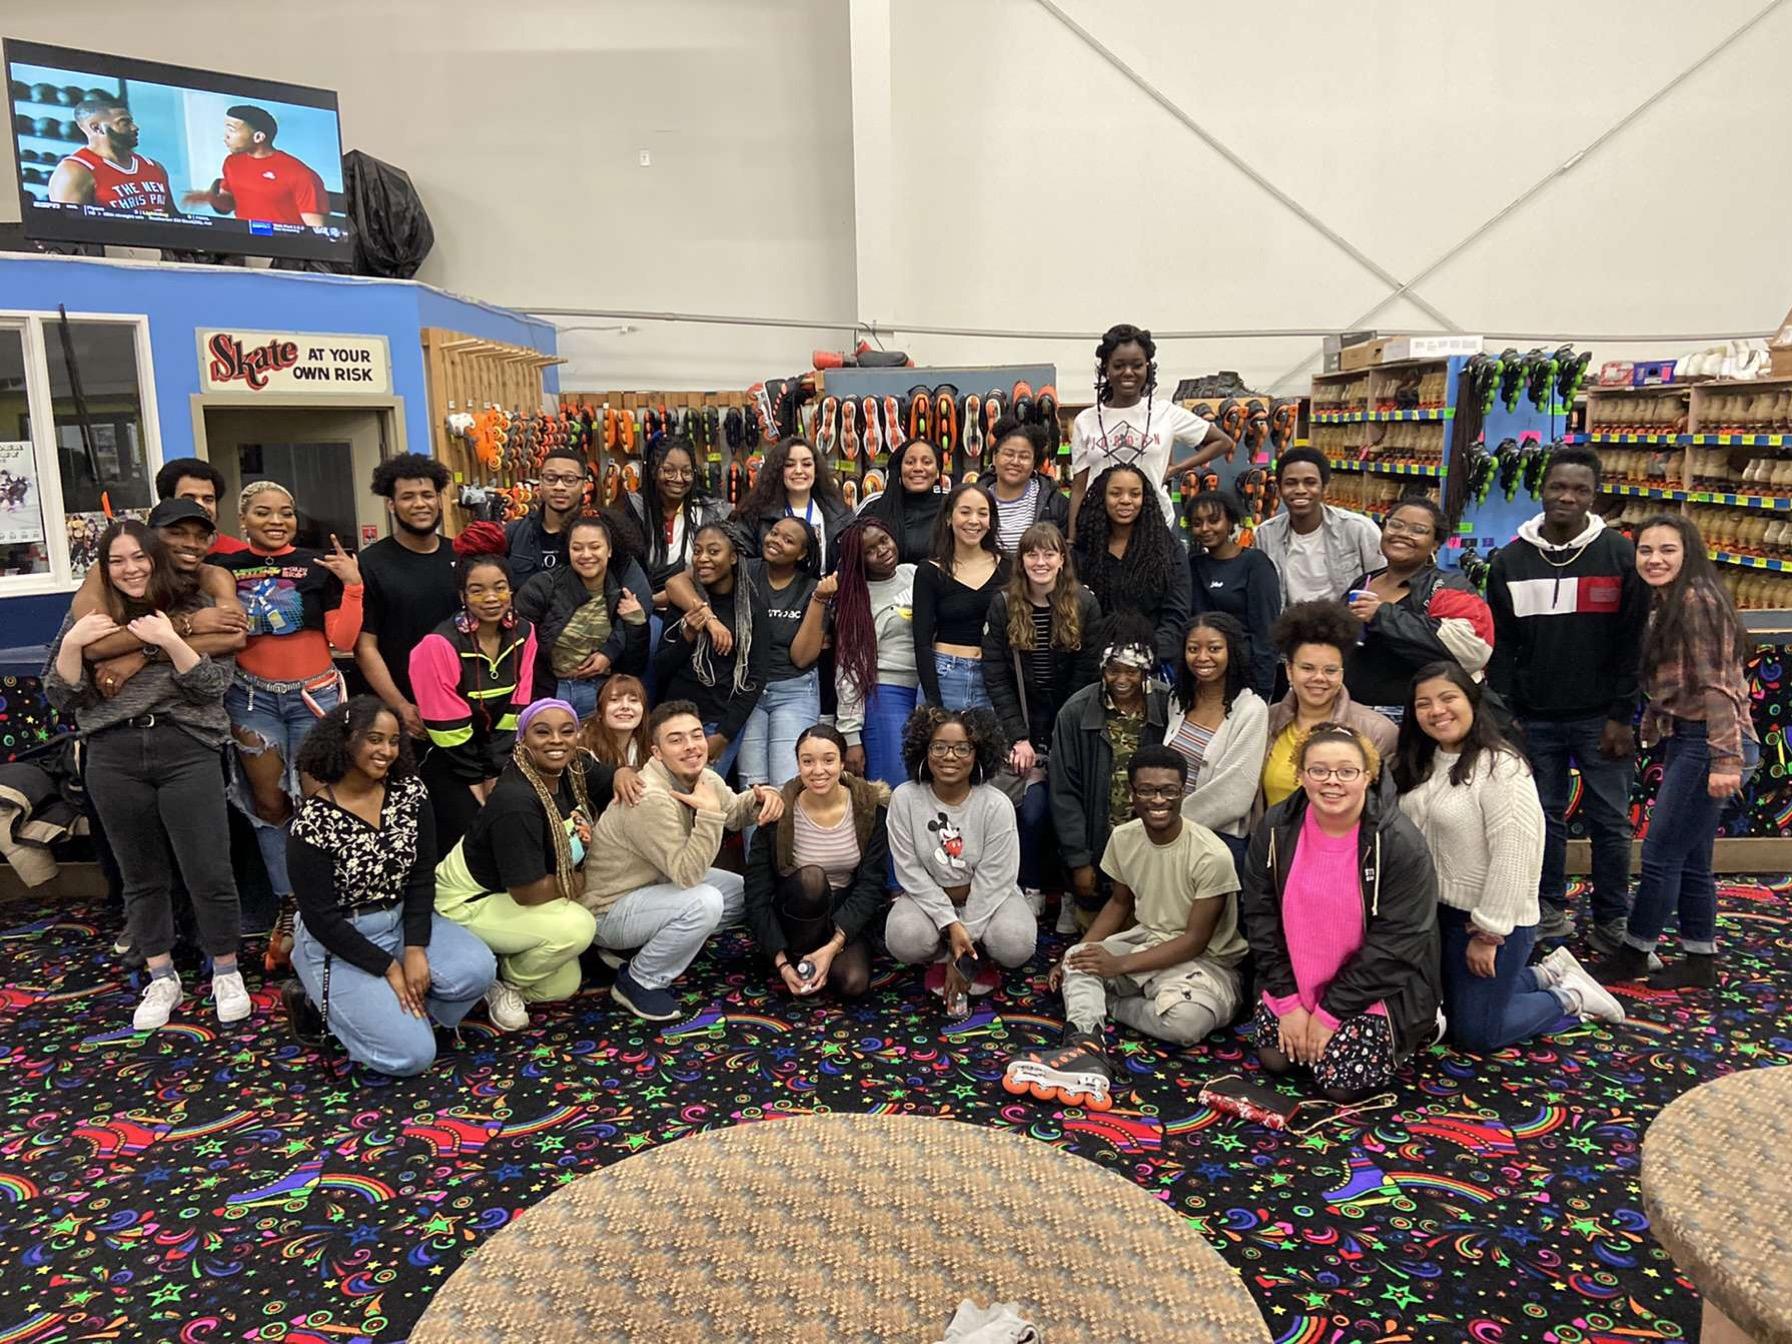 Students from The Black Student Coalition posing and smiling together at a skate rink.